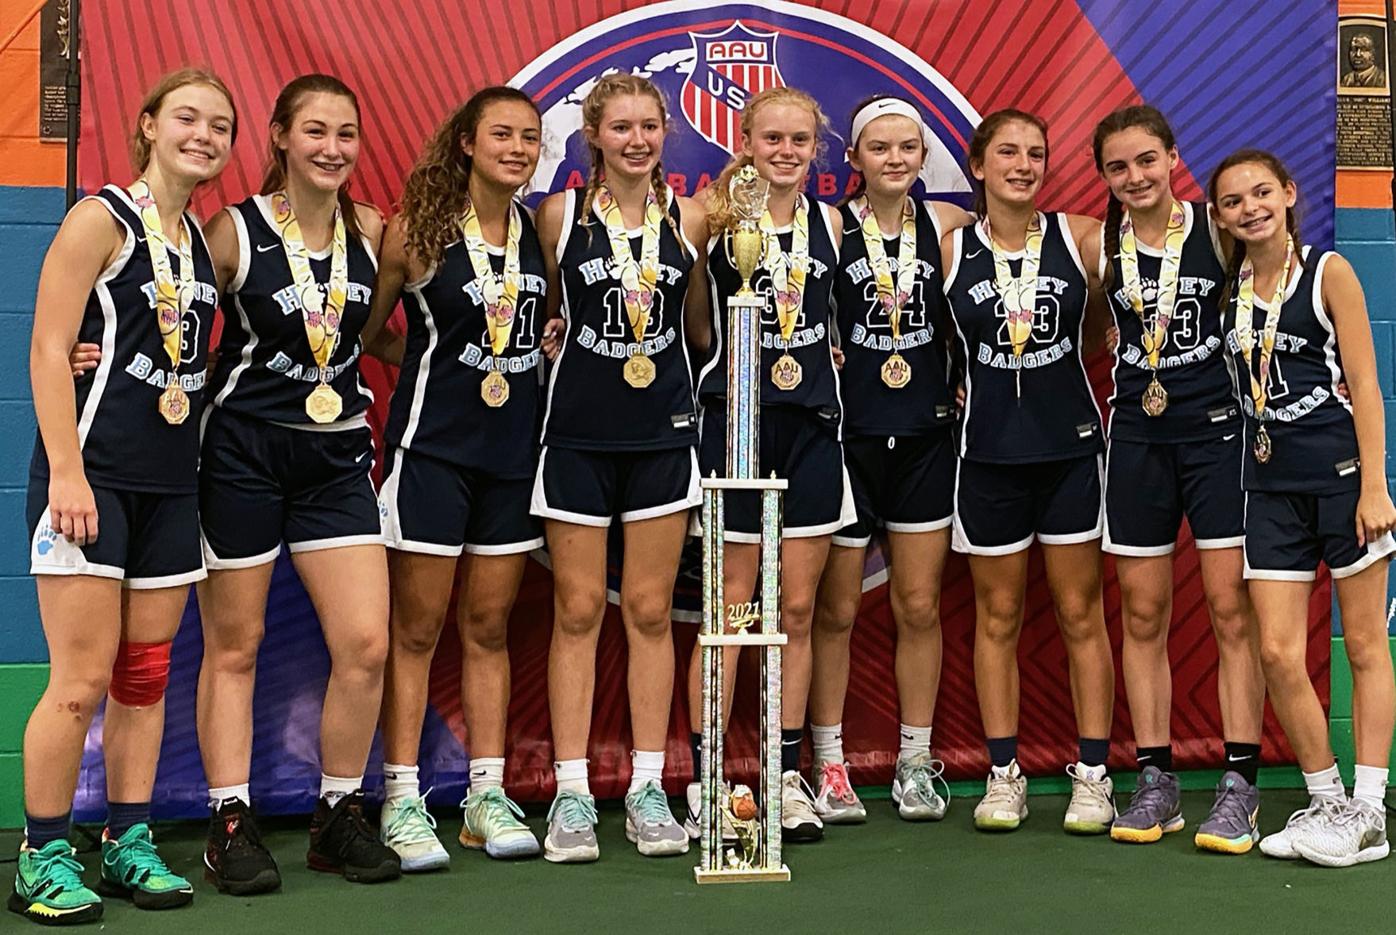 Ride Trolley entusiasme LOCAL BASKETBALL: North AAU girls team brings home a national championship  | Local Sports | thesunchronicle.com